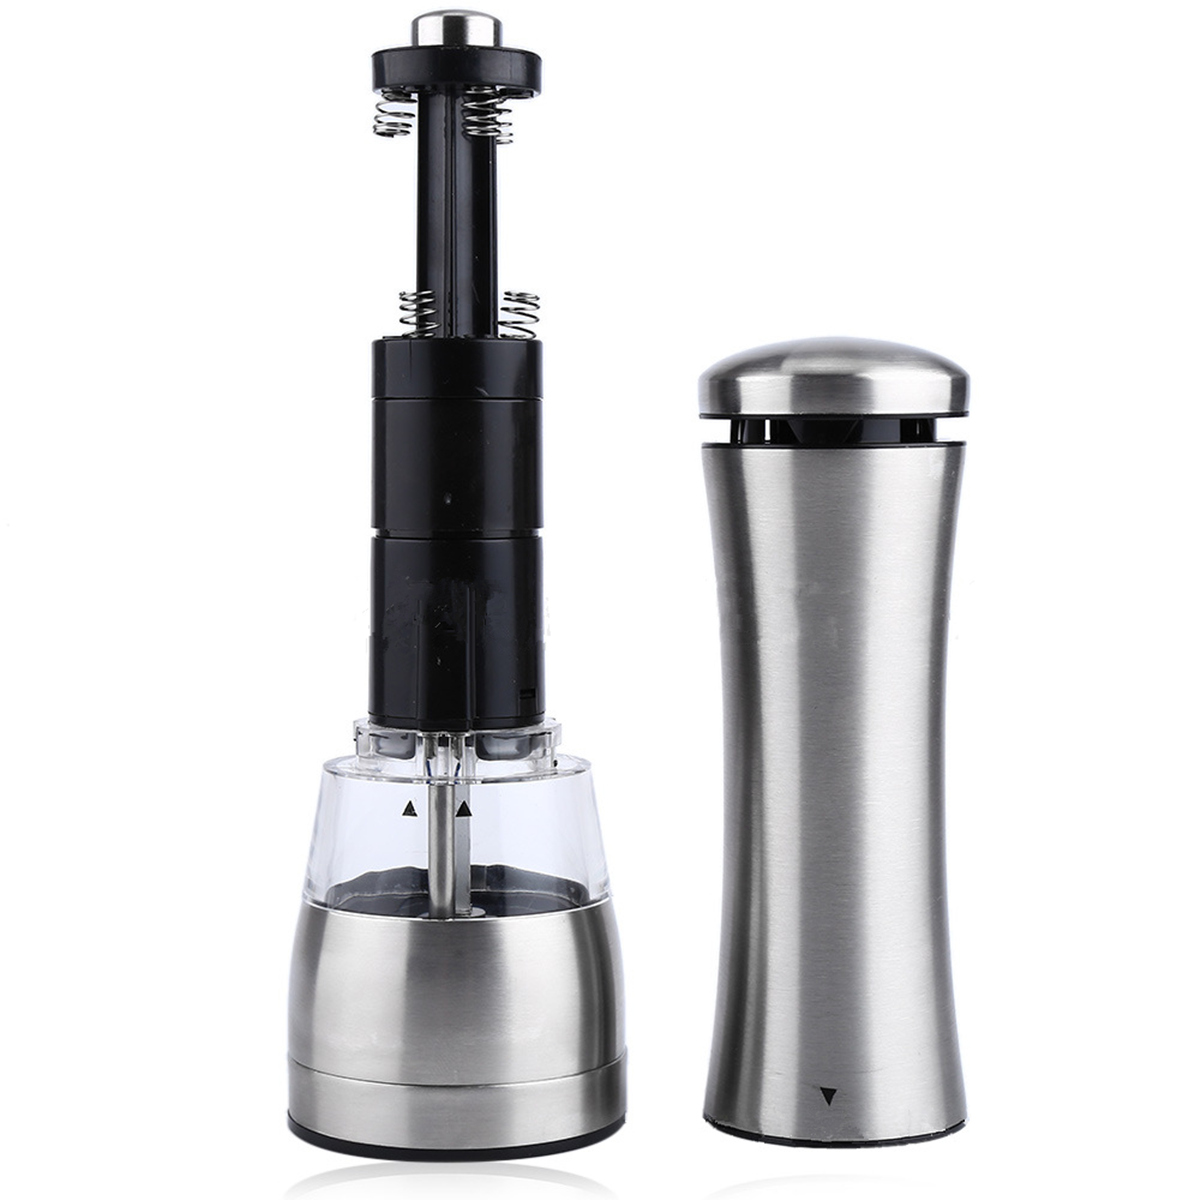 Automatic-Electric-Pepper-Mill-Shakers-Stainless-Steel-Adjustable-Salt-Pepper-Grinder-1346409